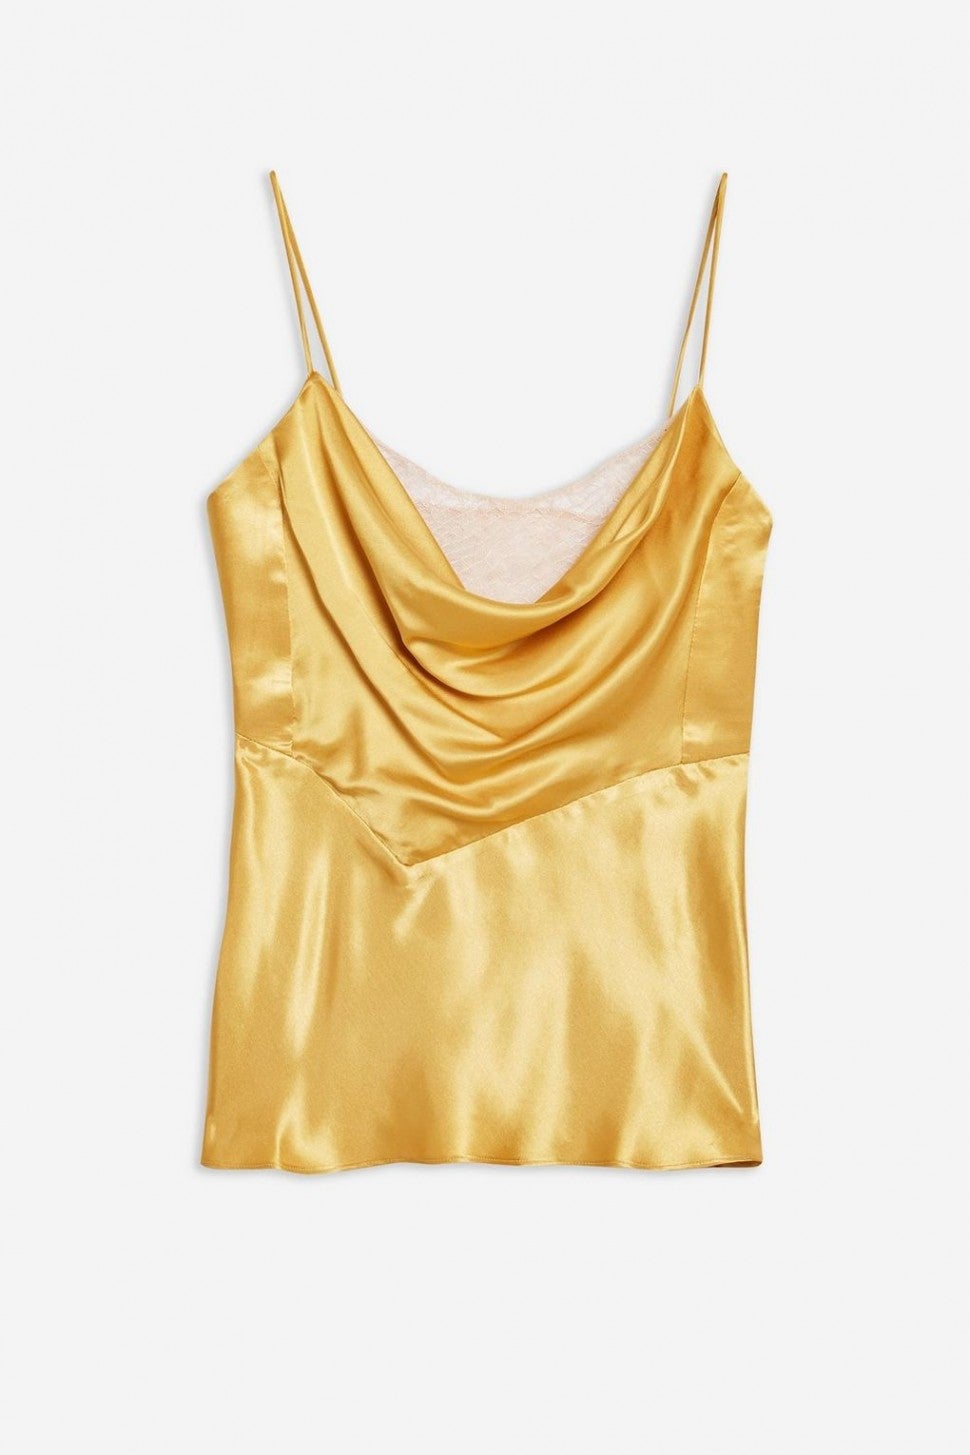 Topshop gold lace cowl cami